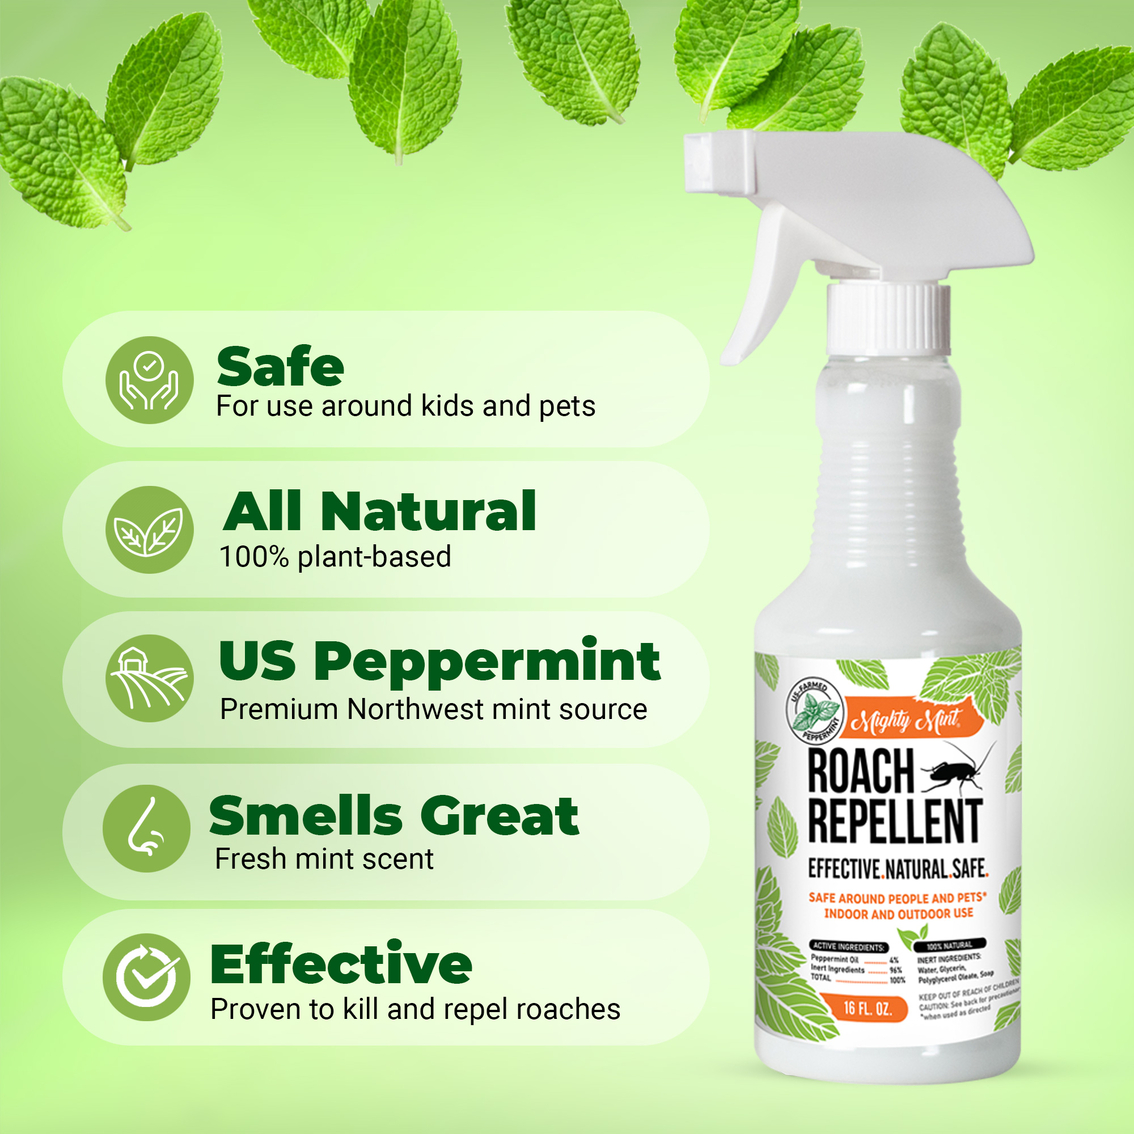 Pure Origins Mighty Mint Peppermint Oil Spray Natural Roach Killer Deterrent 16 oz. - Image 2 of 4